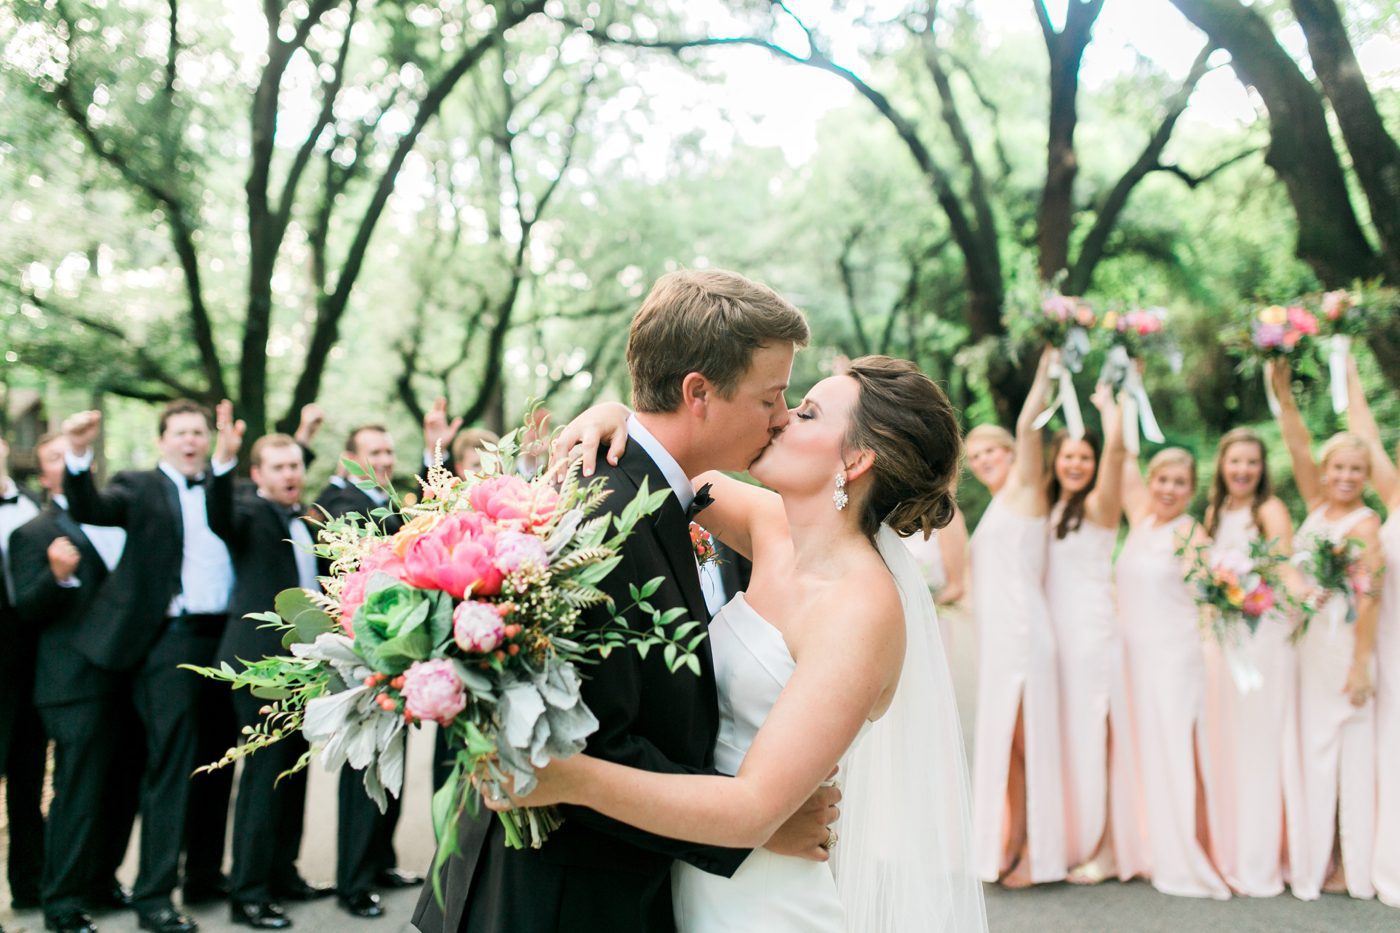 Best bridal photo idea bride and groom kissing with bridal party cheering in the background. Photo by Charleston wedding photographer Catherine Ann Photography